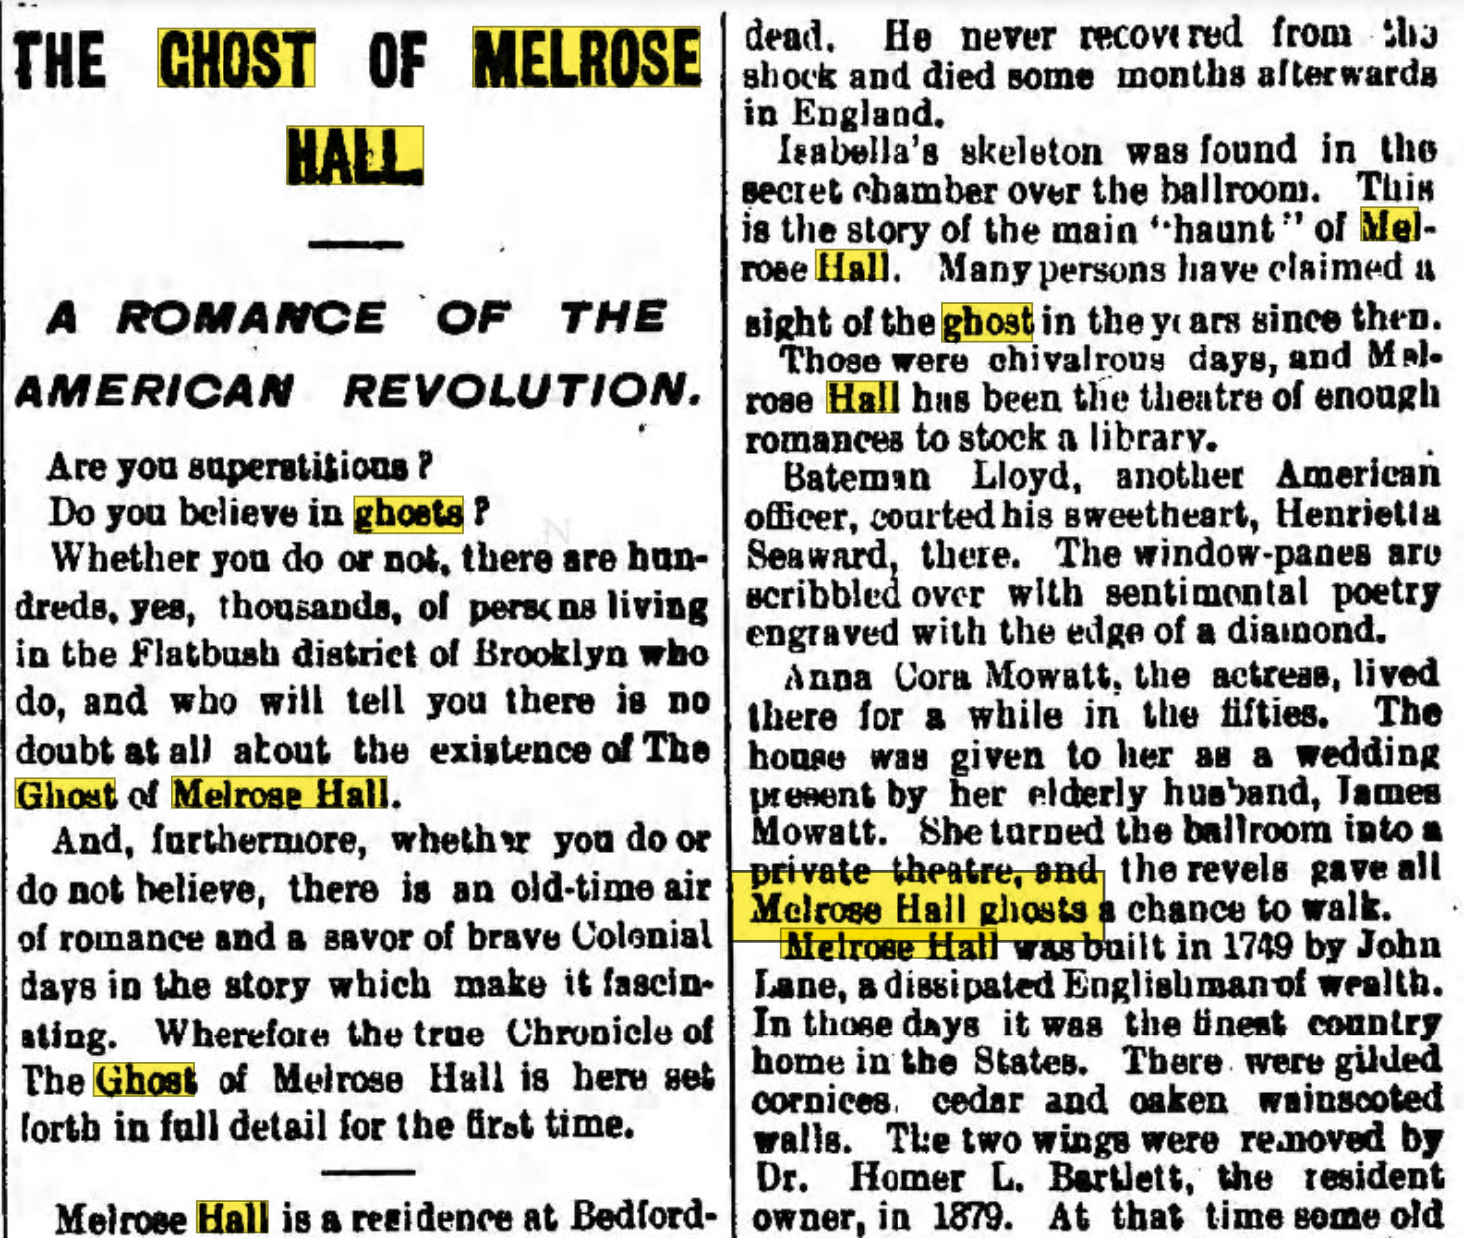 Newspaper article about the ghost of Melrose Hall